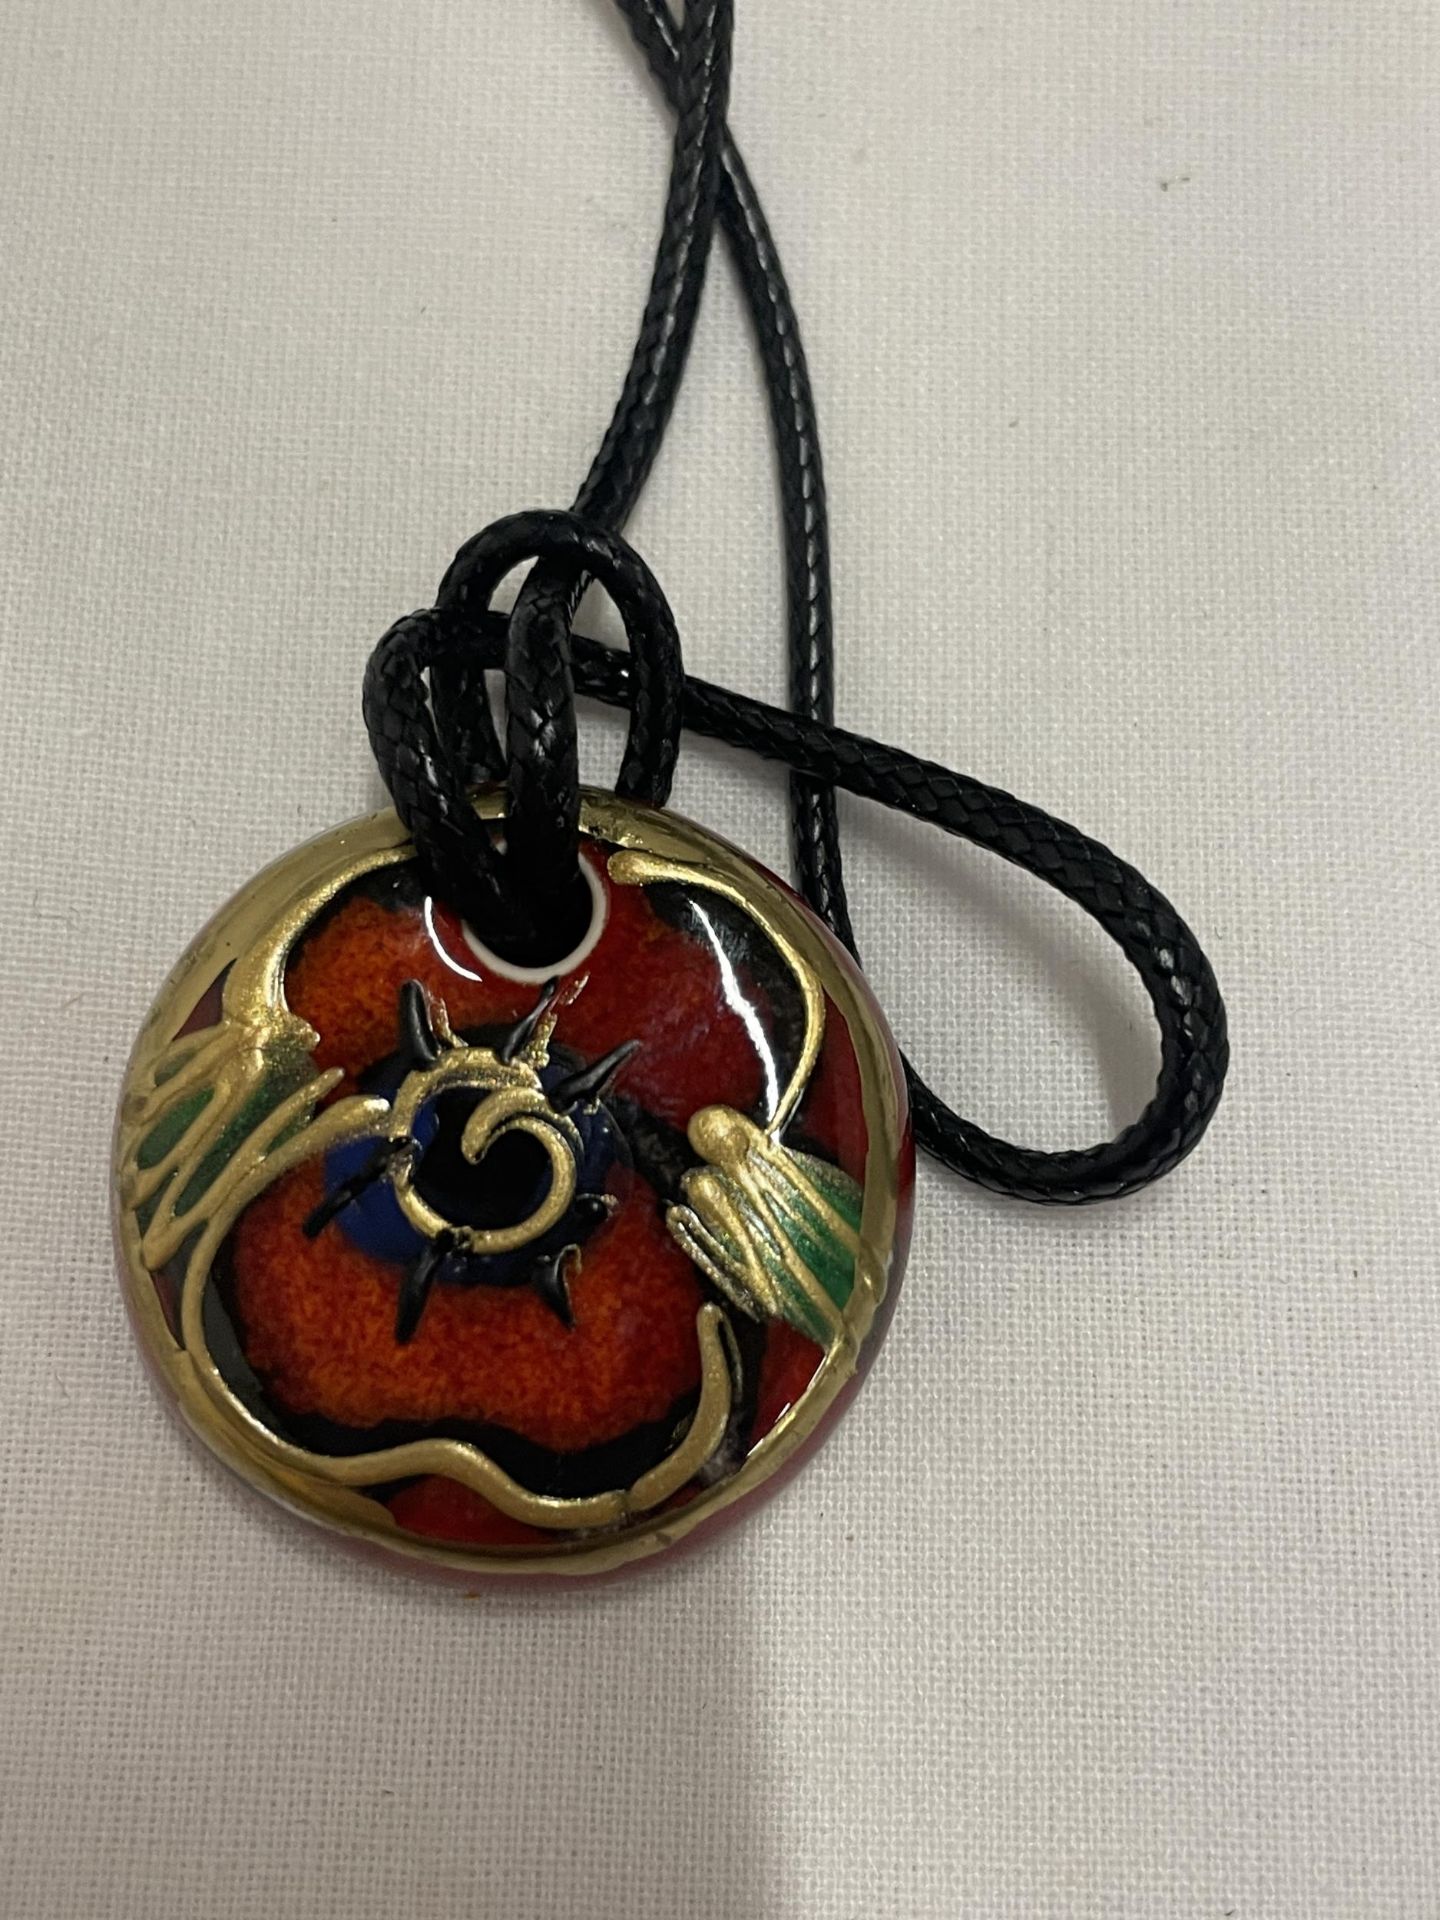 AN ANITA HARRIS HAND PAINTED AND SIGNED IN GOLD BOXED POPPY PENDANT - Image 2 of 3